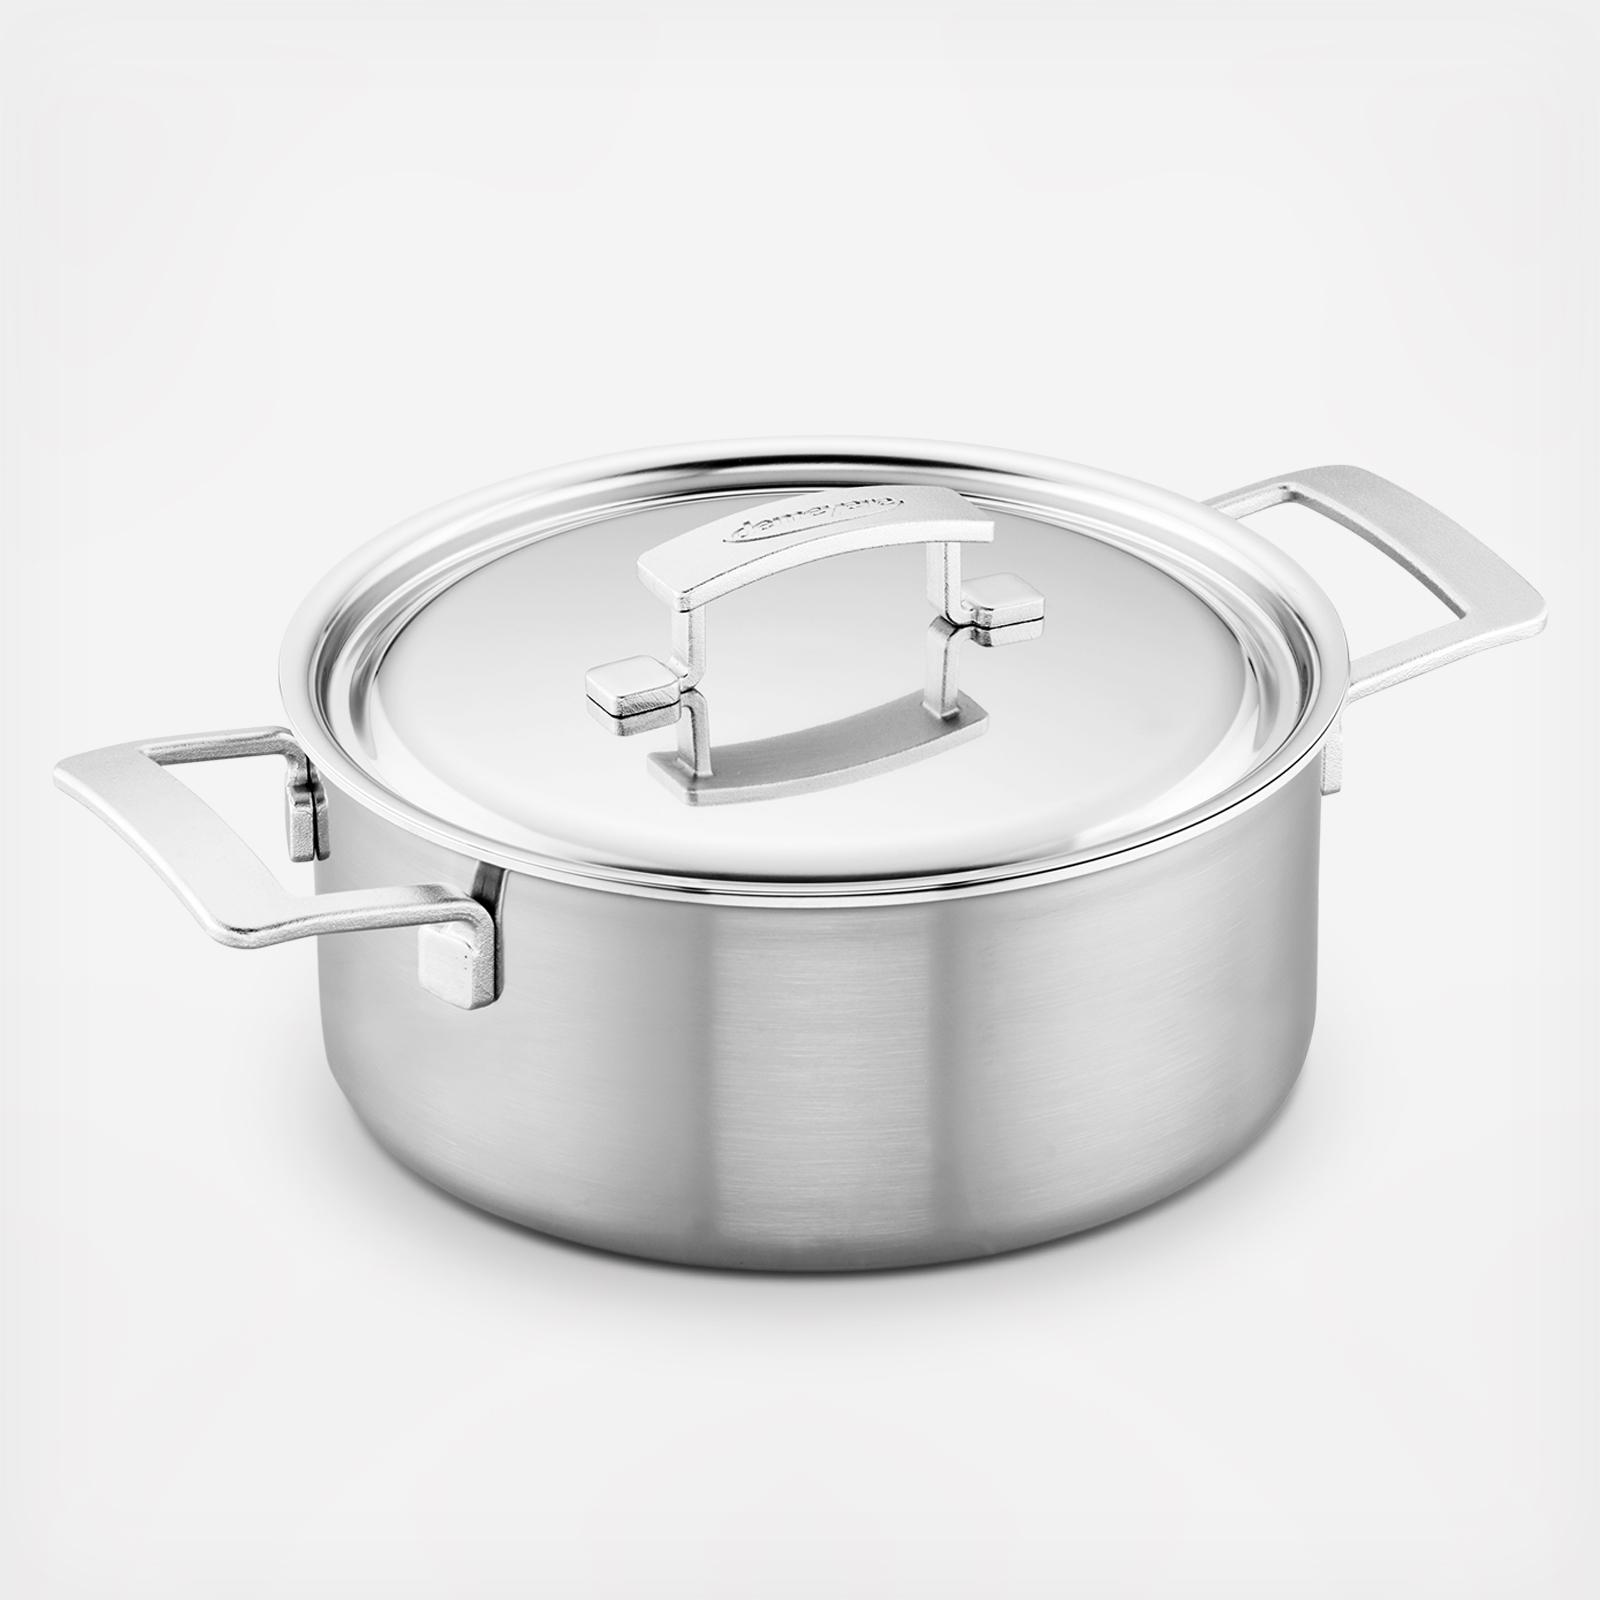 Demeyere Commercial-Quality 5-Ply Stainless Steel Cookware Set, 9-Piece